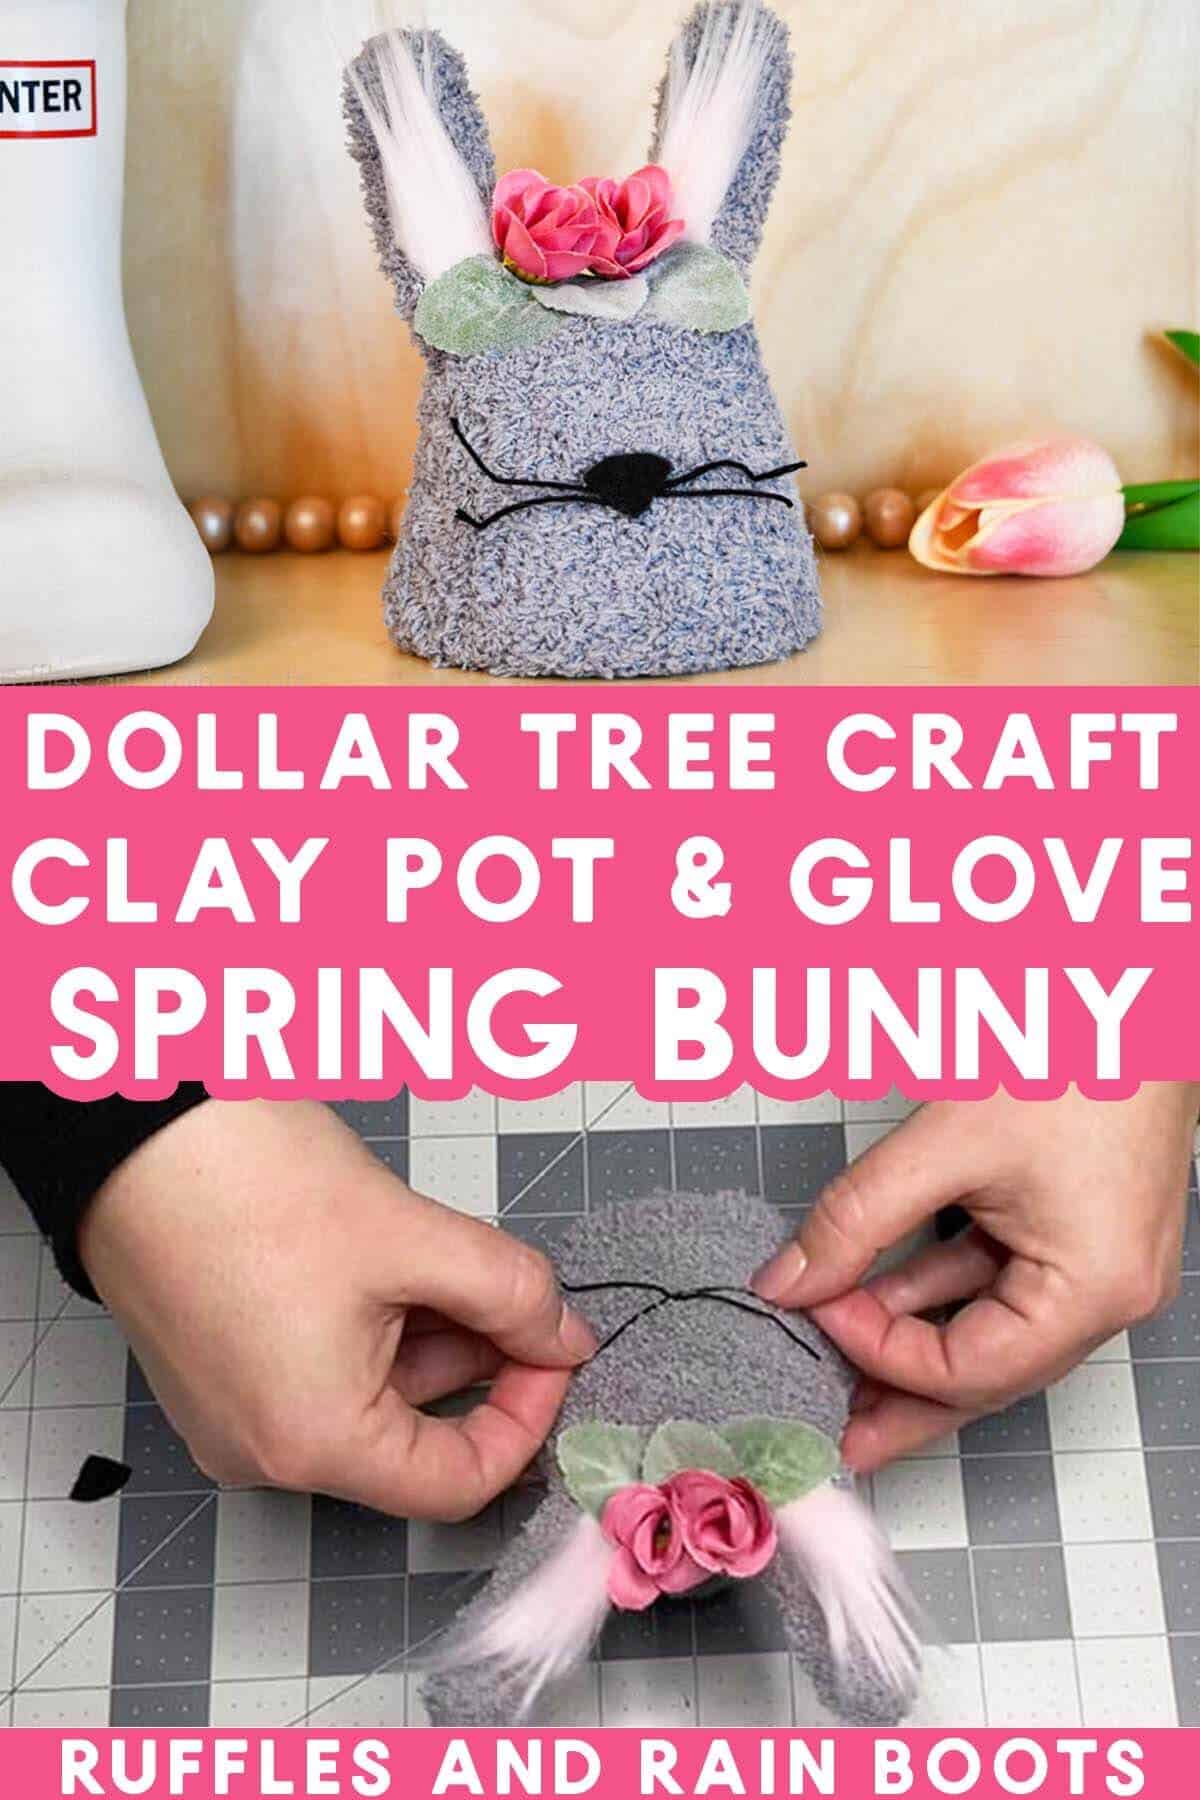 Vertical stacked image with a gray bunny on top and a process shot of a crafter adding whiskers with text which reads Dollar Tree craft clay pot and glove Spring Bunny.